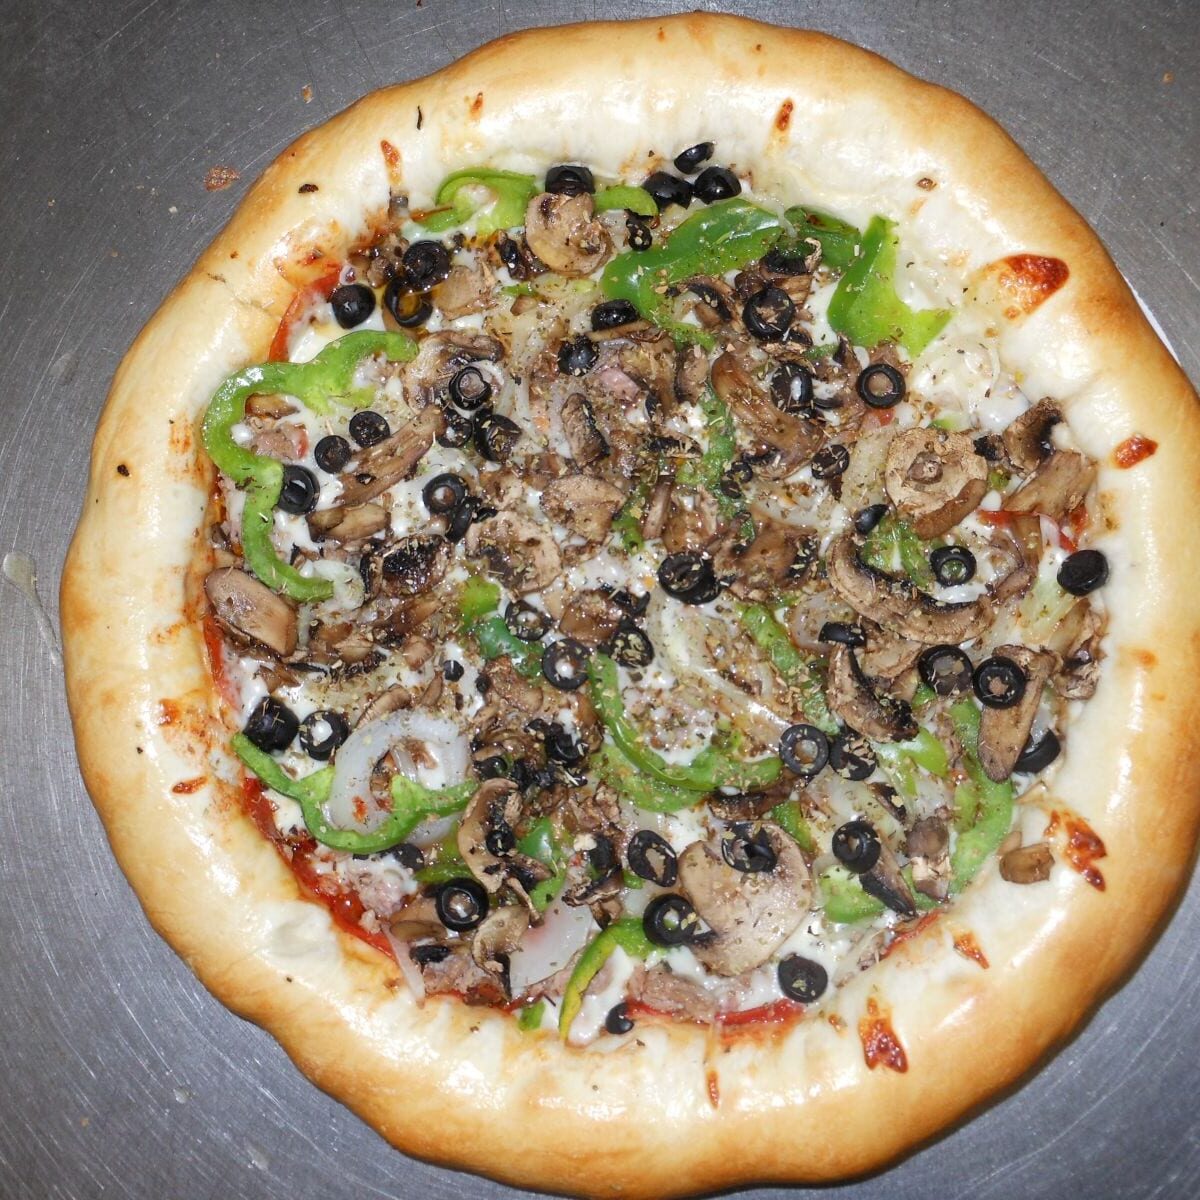 A pizza with black olives, mushrooms and green peppers.